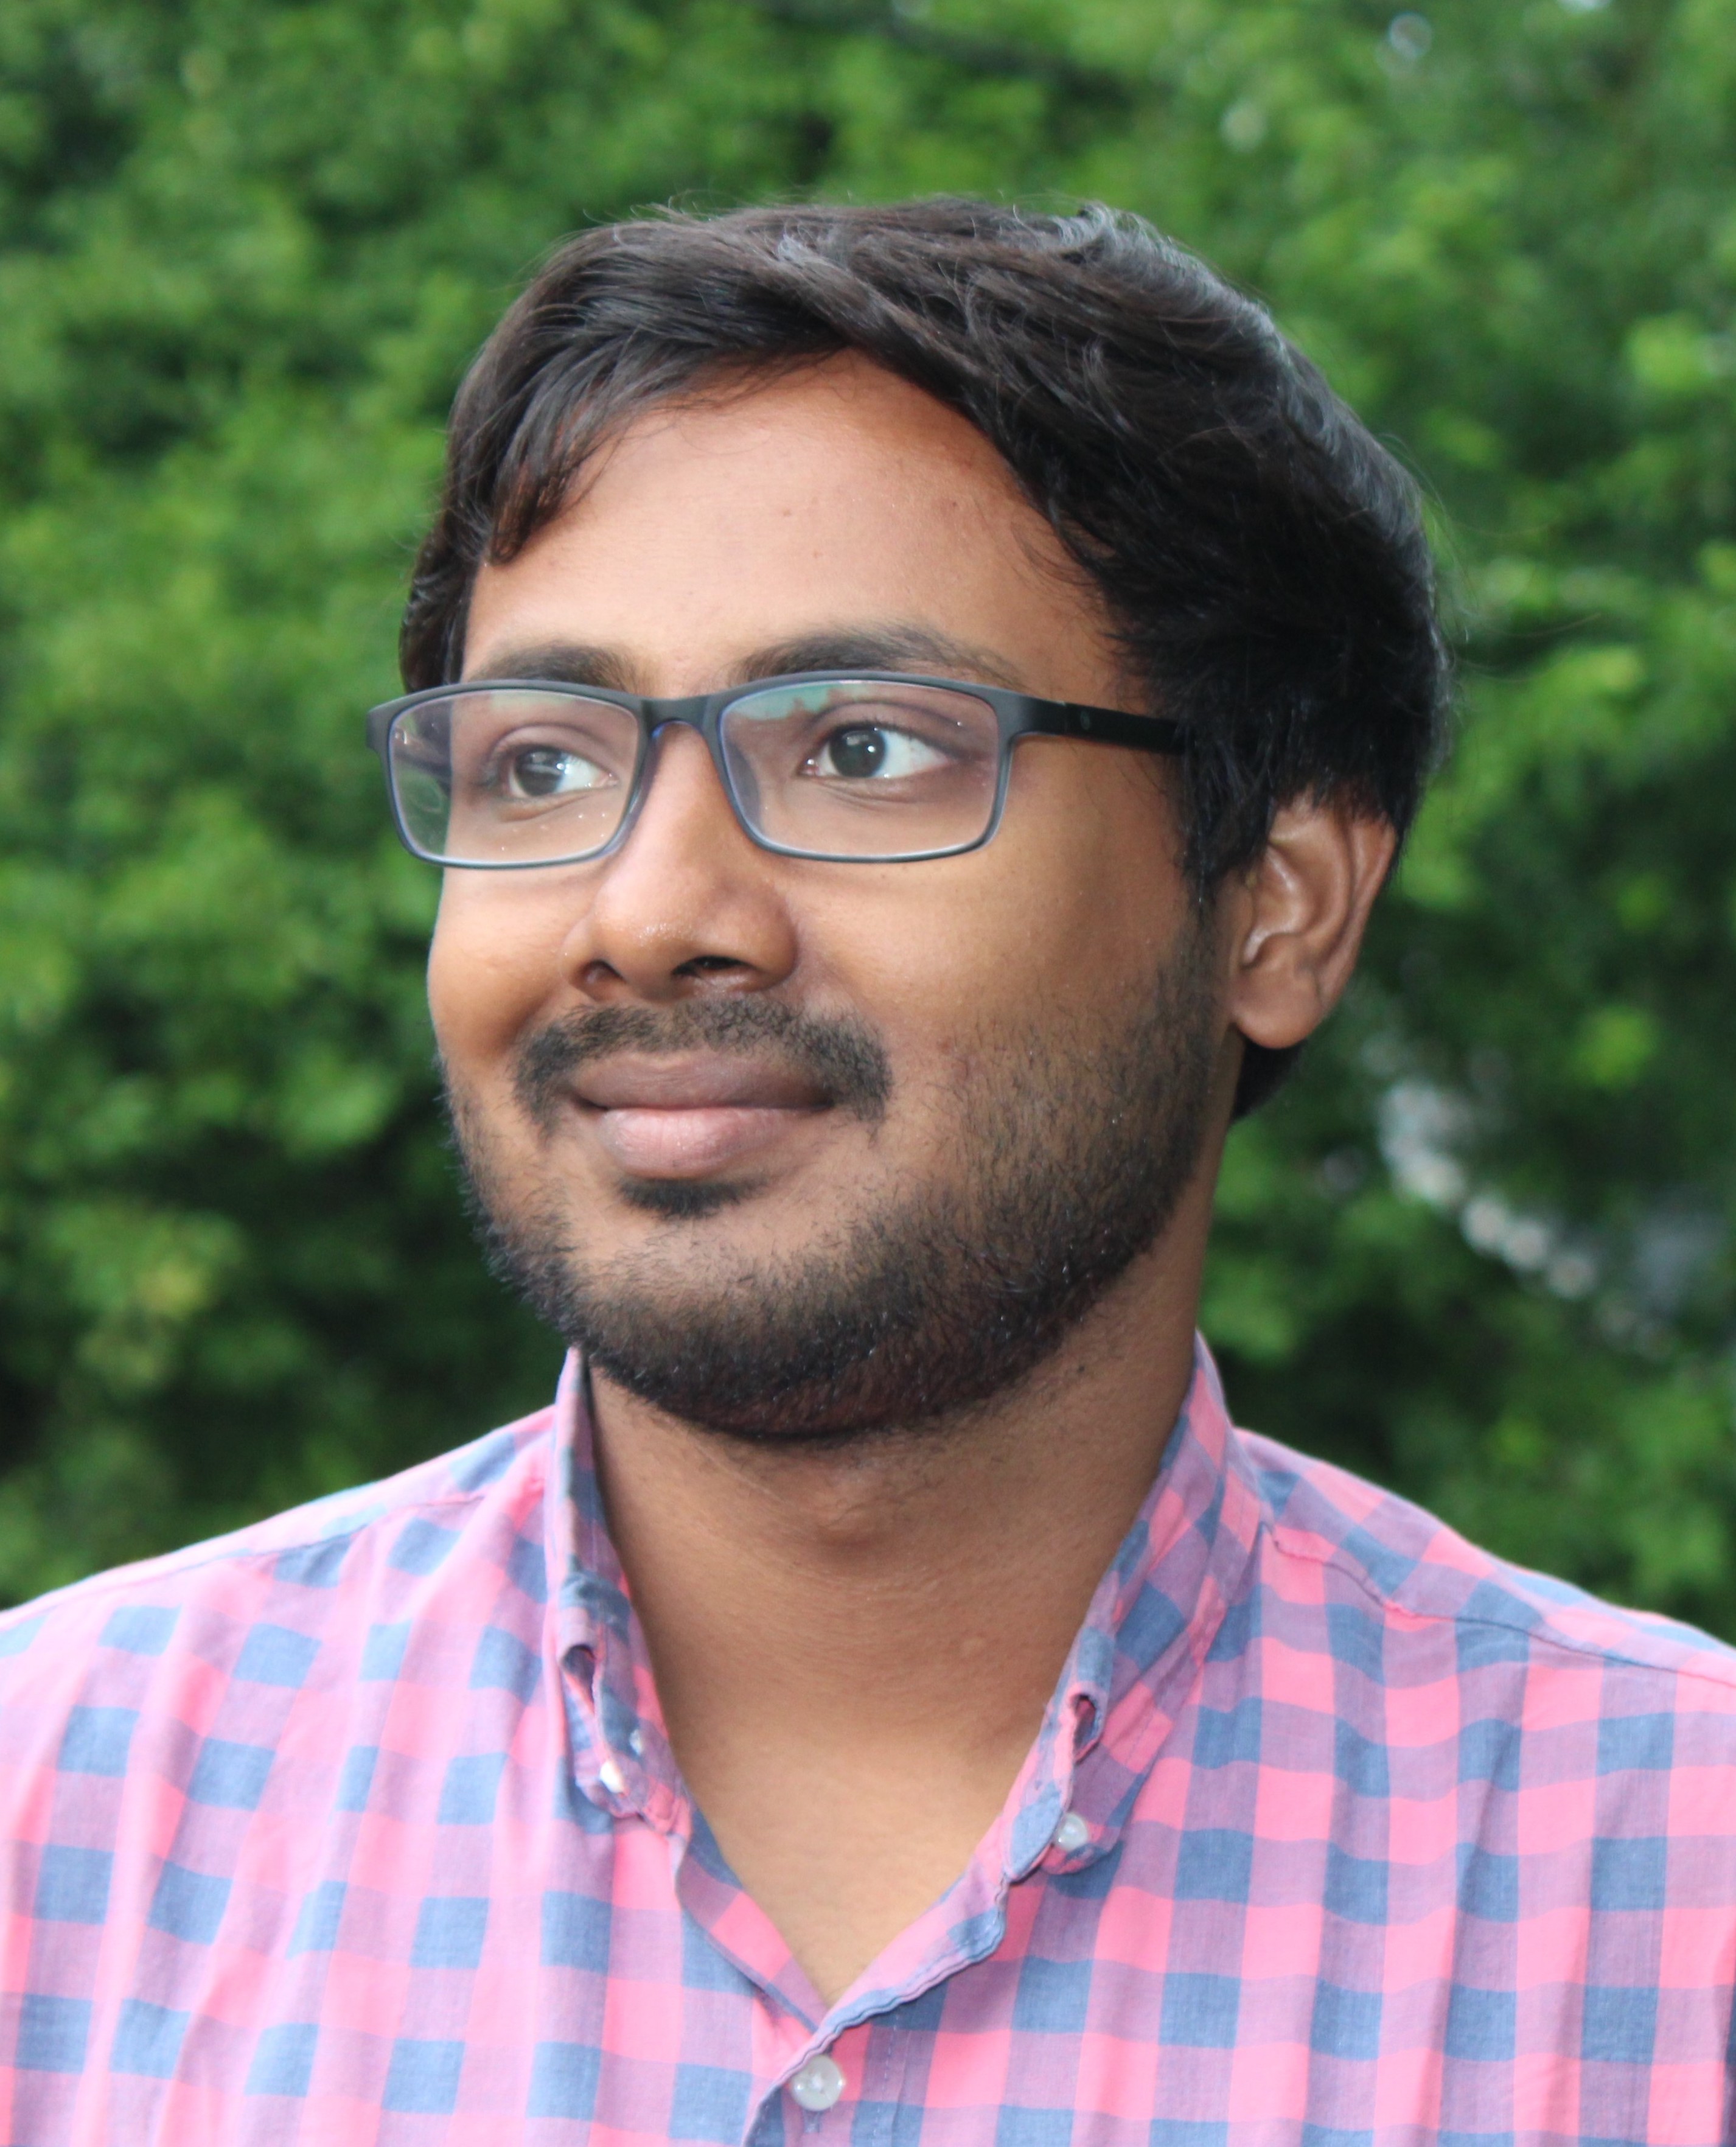 Headshot of Supriyo slightly smiling looking slighty to the left with greenery in the background